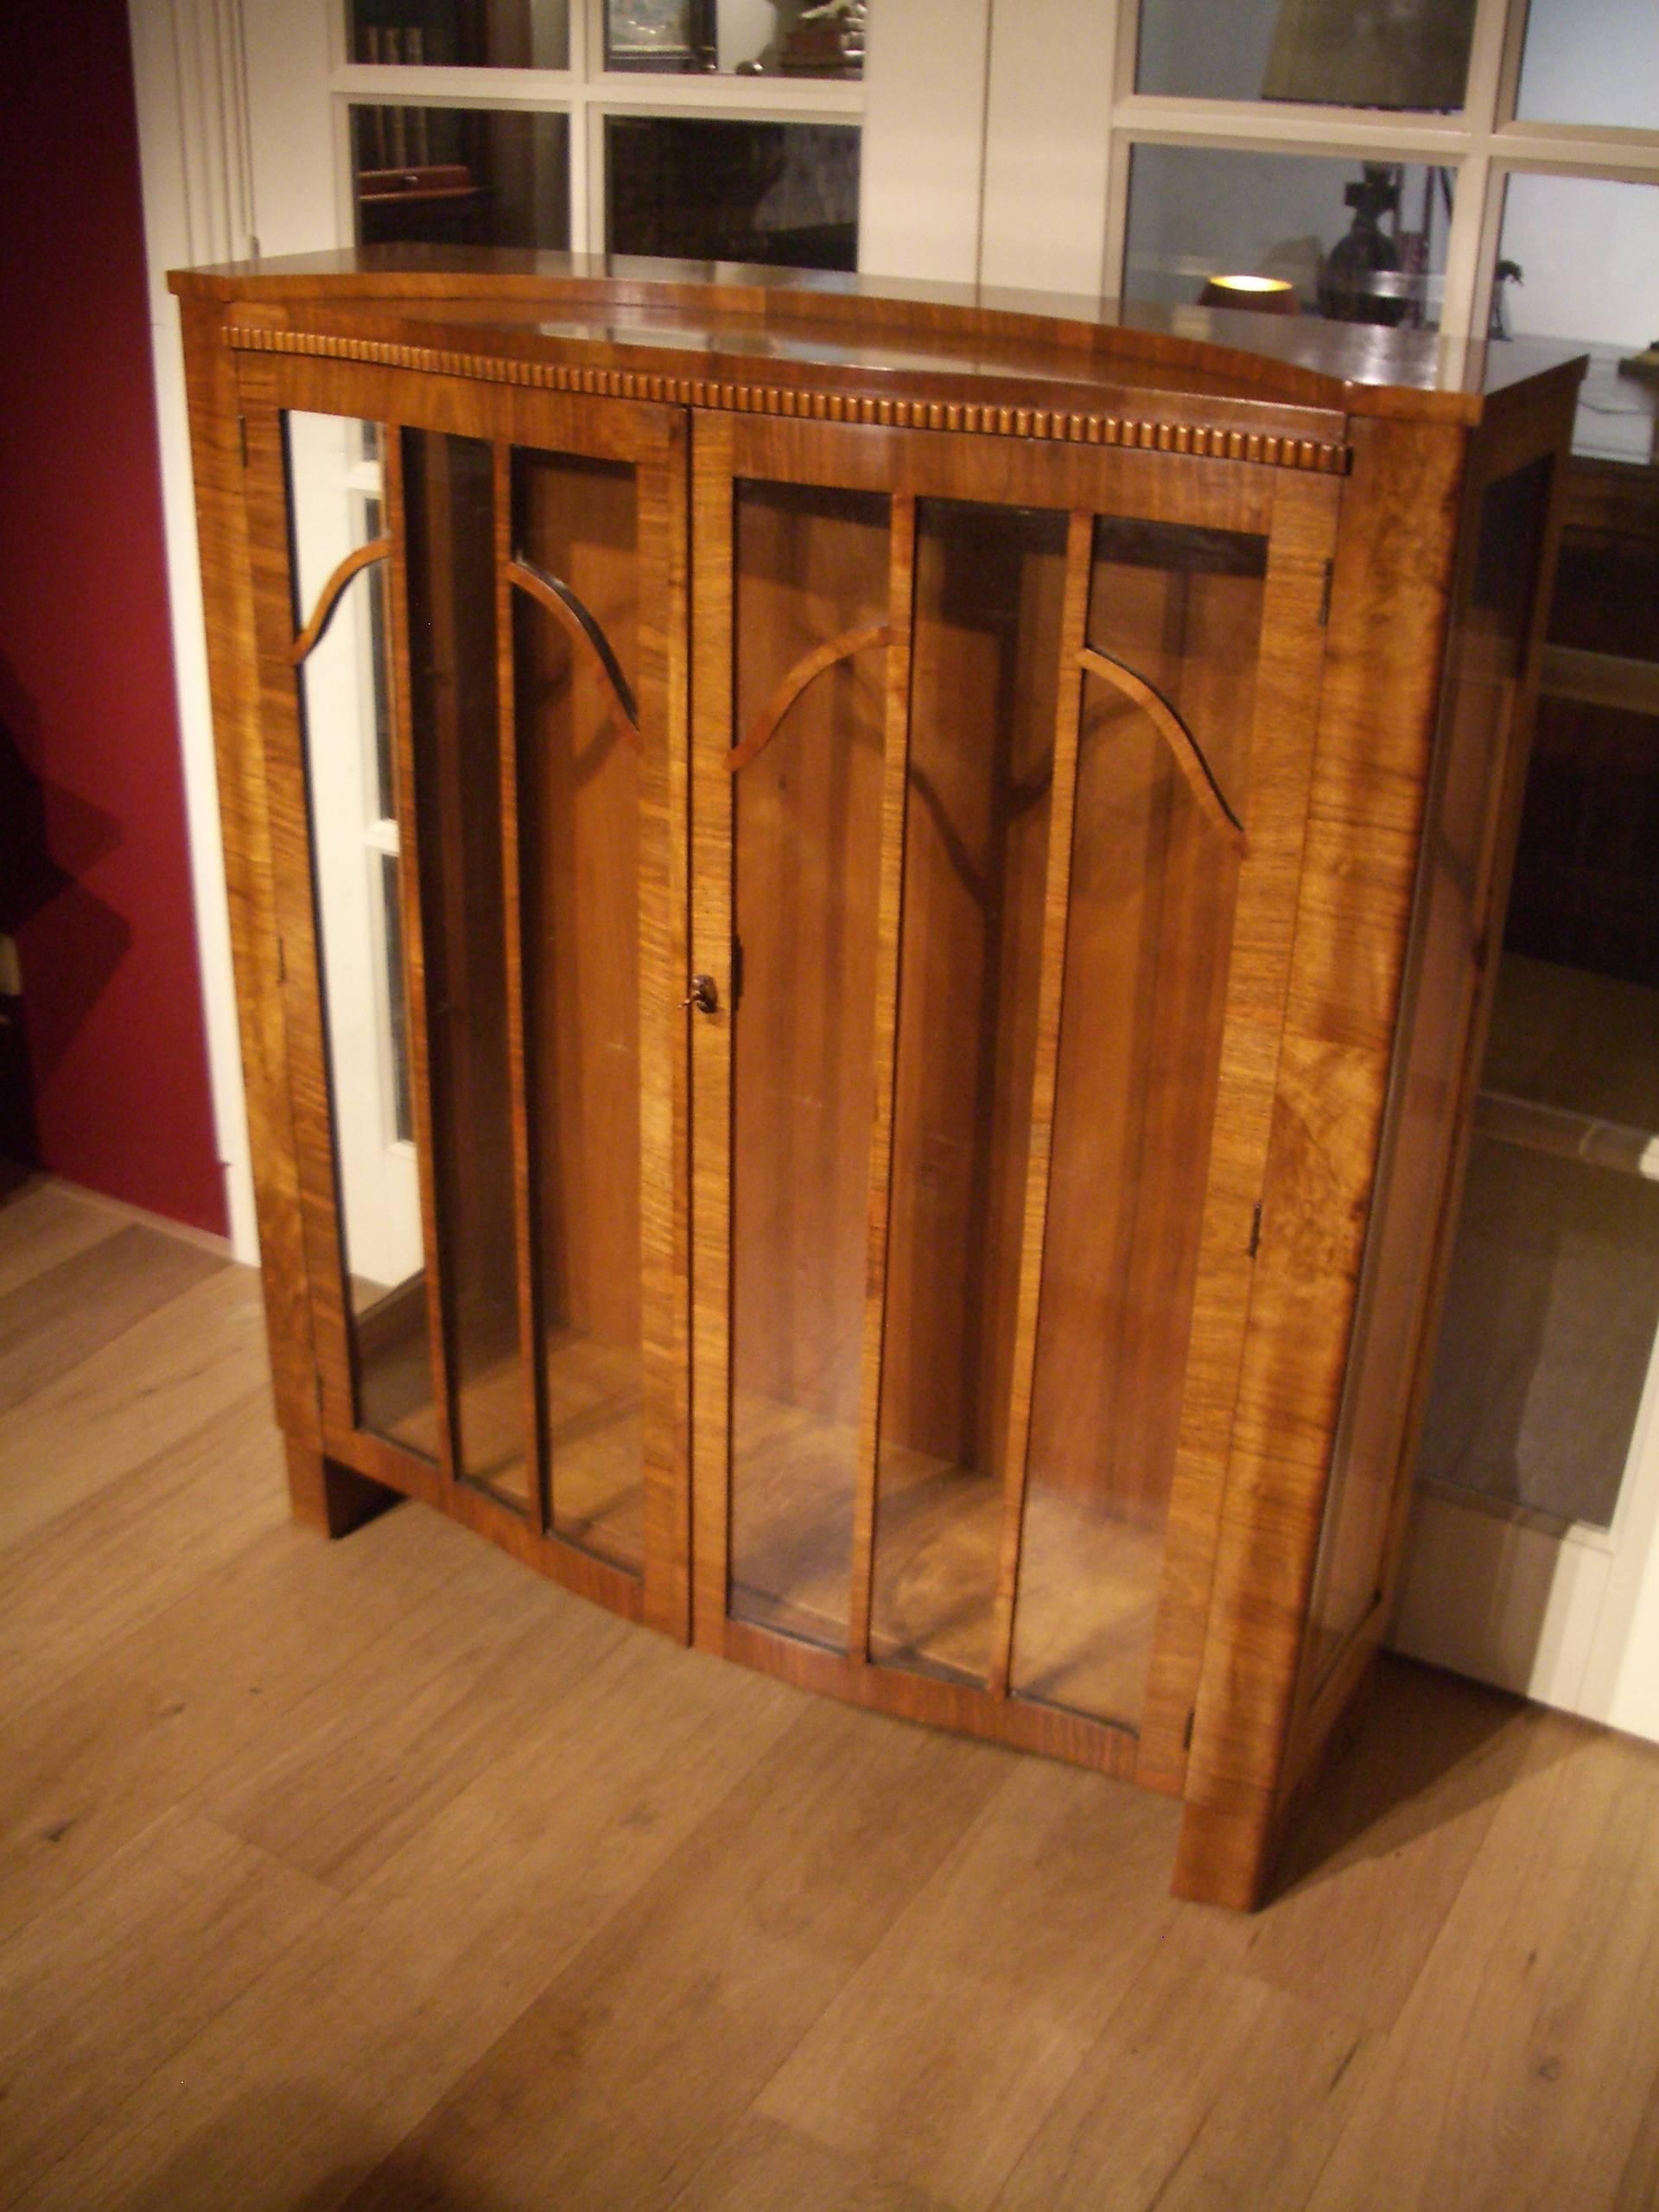 Beautiful walnut Art Deco cabinet in good and original condition. With two glass shelves.
Origin: England
Period: 1920-1930
Size: W 102cm, D 33cm, H 117cm.